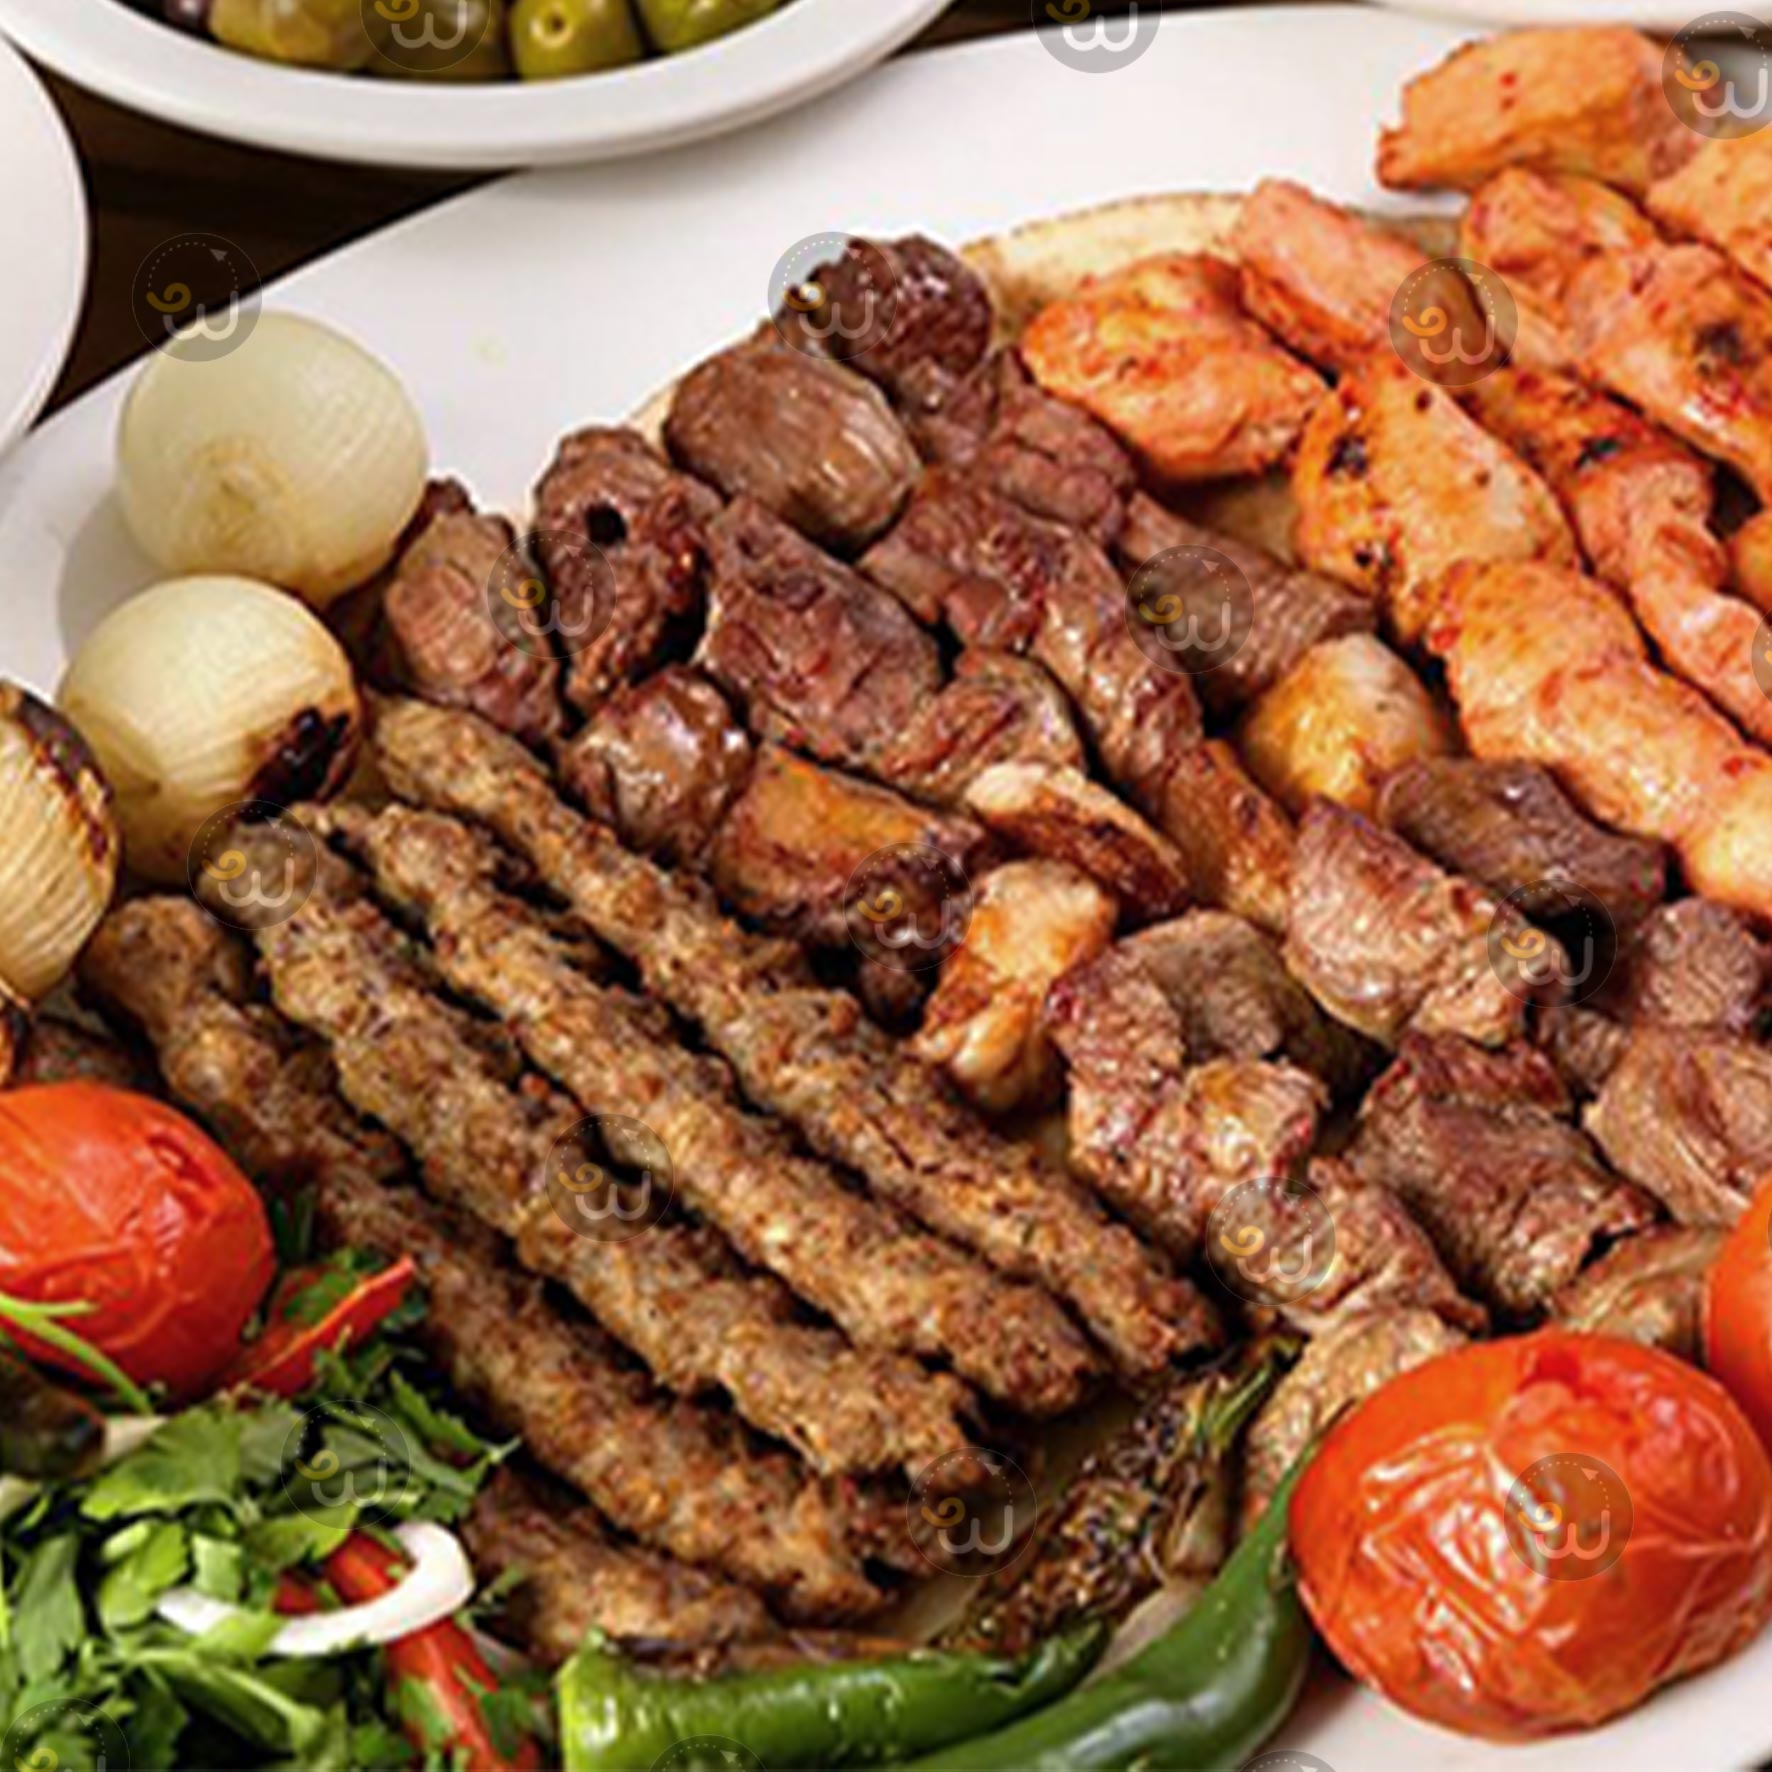 Two kilos mixed with one kilo chicken kebab